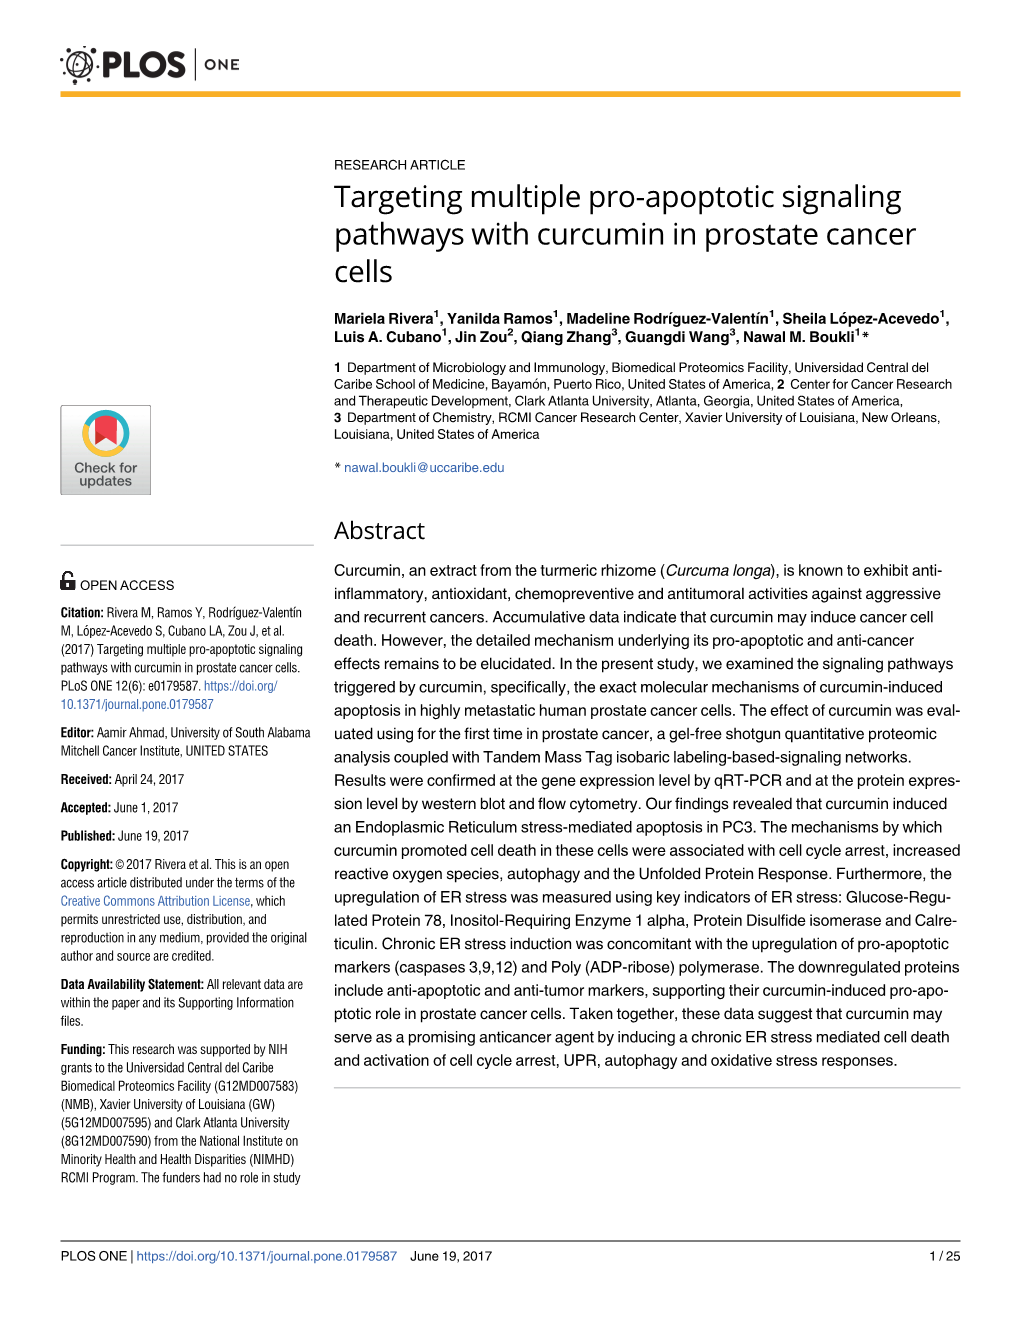 Targeting Multiple Pro-Apoptotic Signaling Pathways with Curcumin in Prostate Cancer Cells